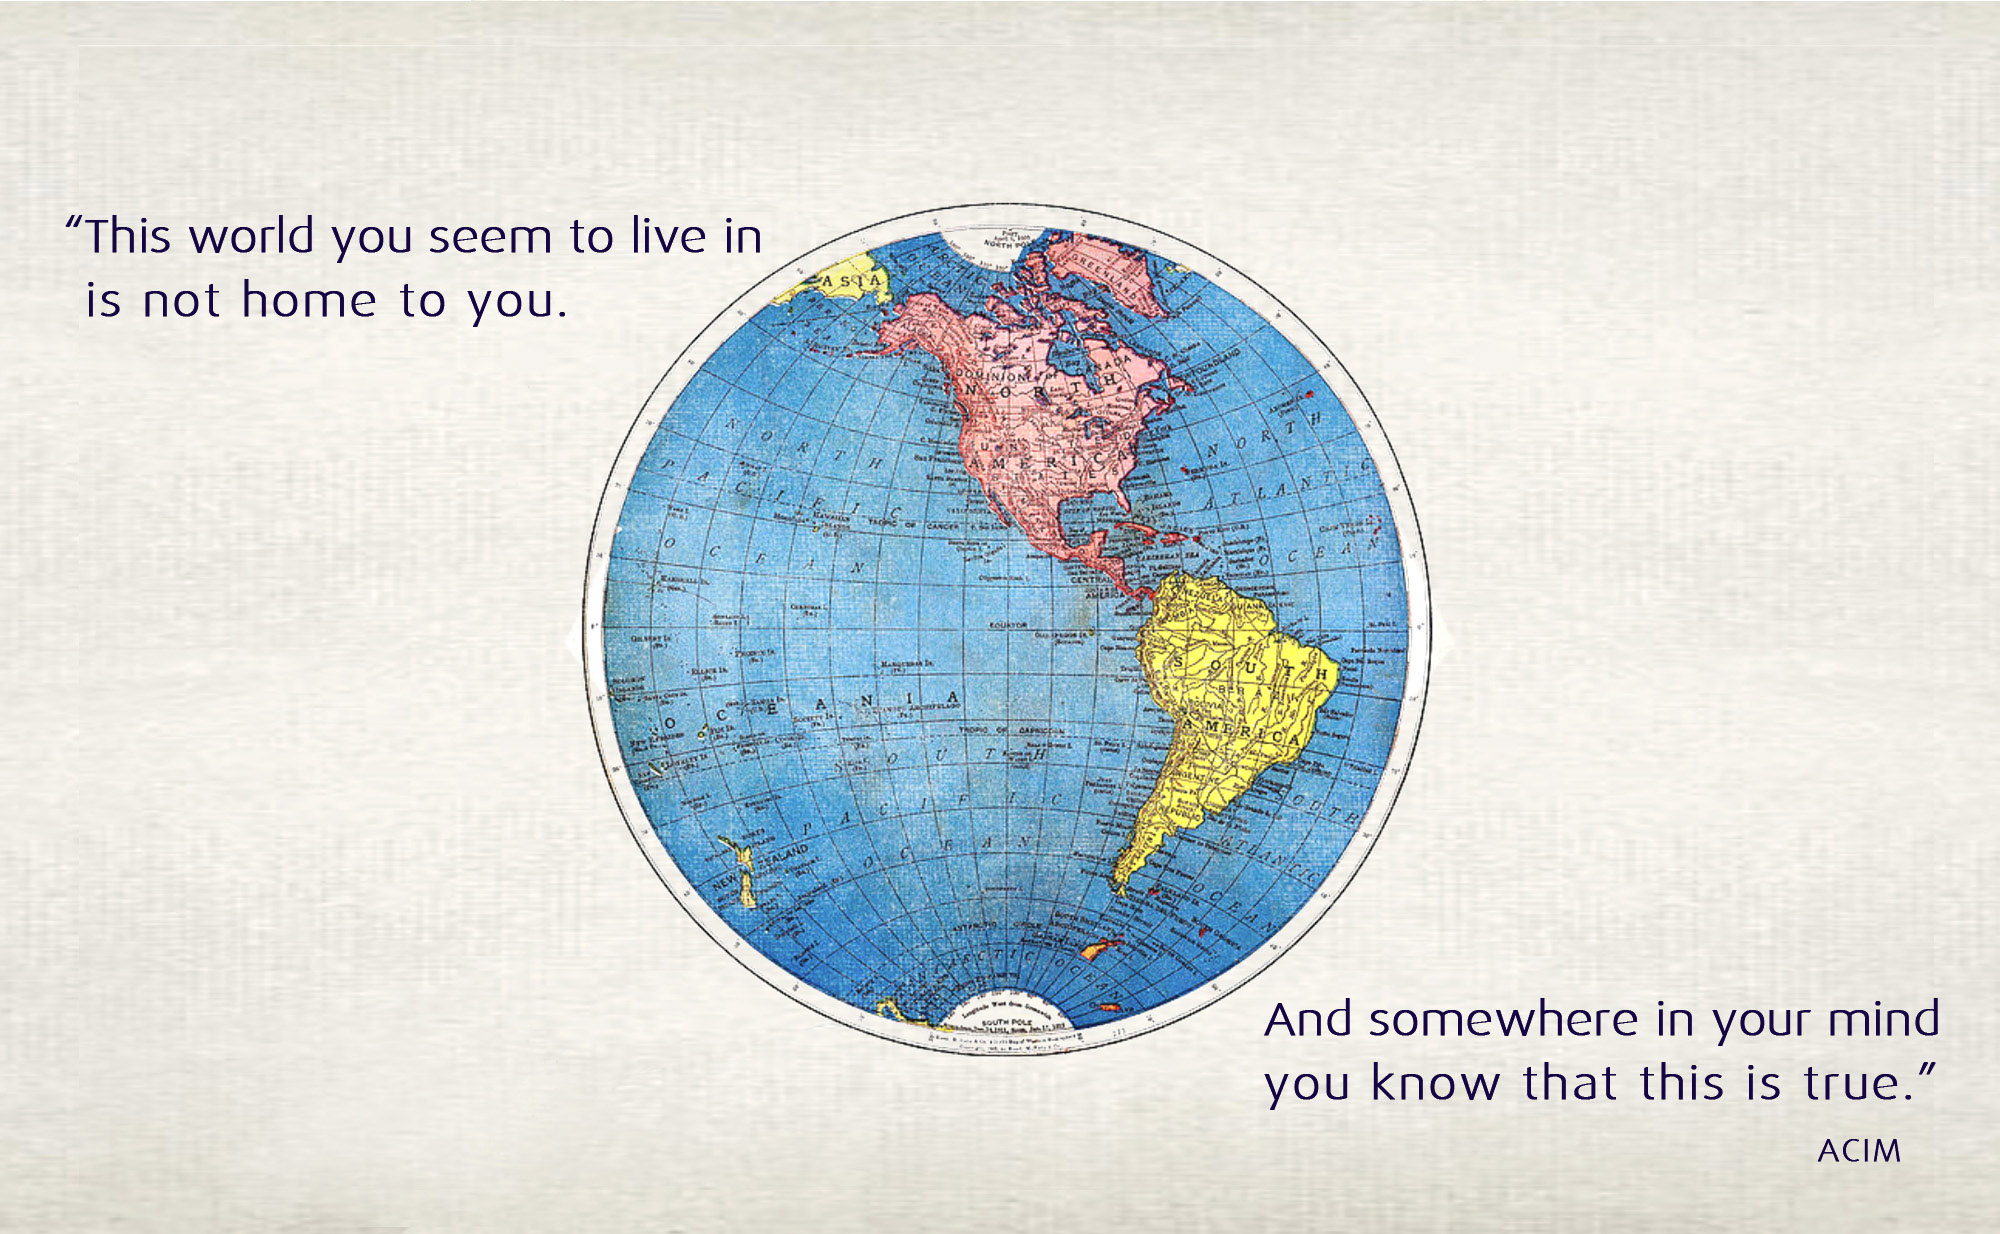 This world you seem to live in is not home to you. And somewhere in your mind you know that this is true.